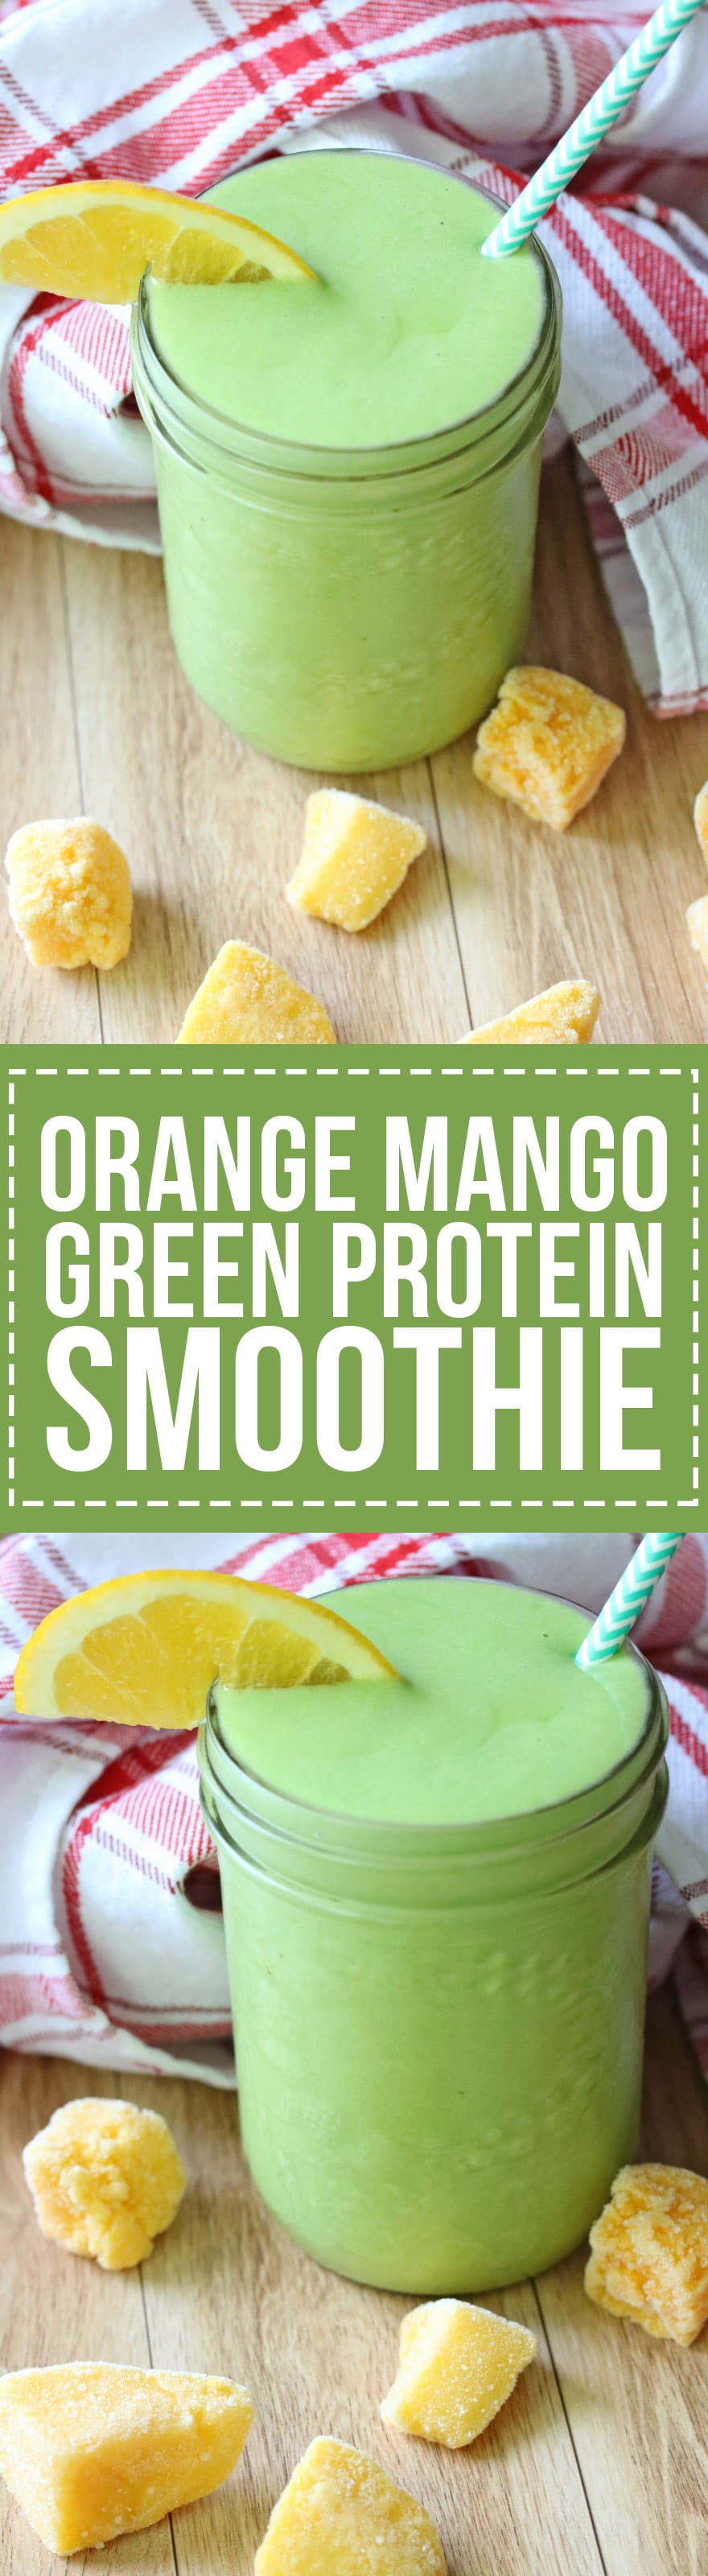 This Orange Mango Green Protein Smoothie is a great breakfast or post-workout pick-me-up with mango, orange juice, avocado, spinach, almond milk and your favorite protein powder.